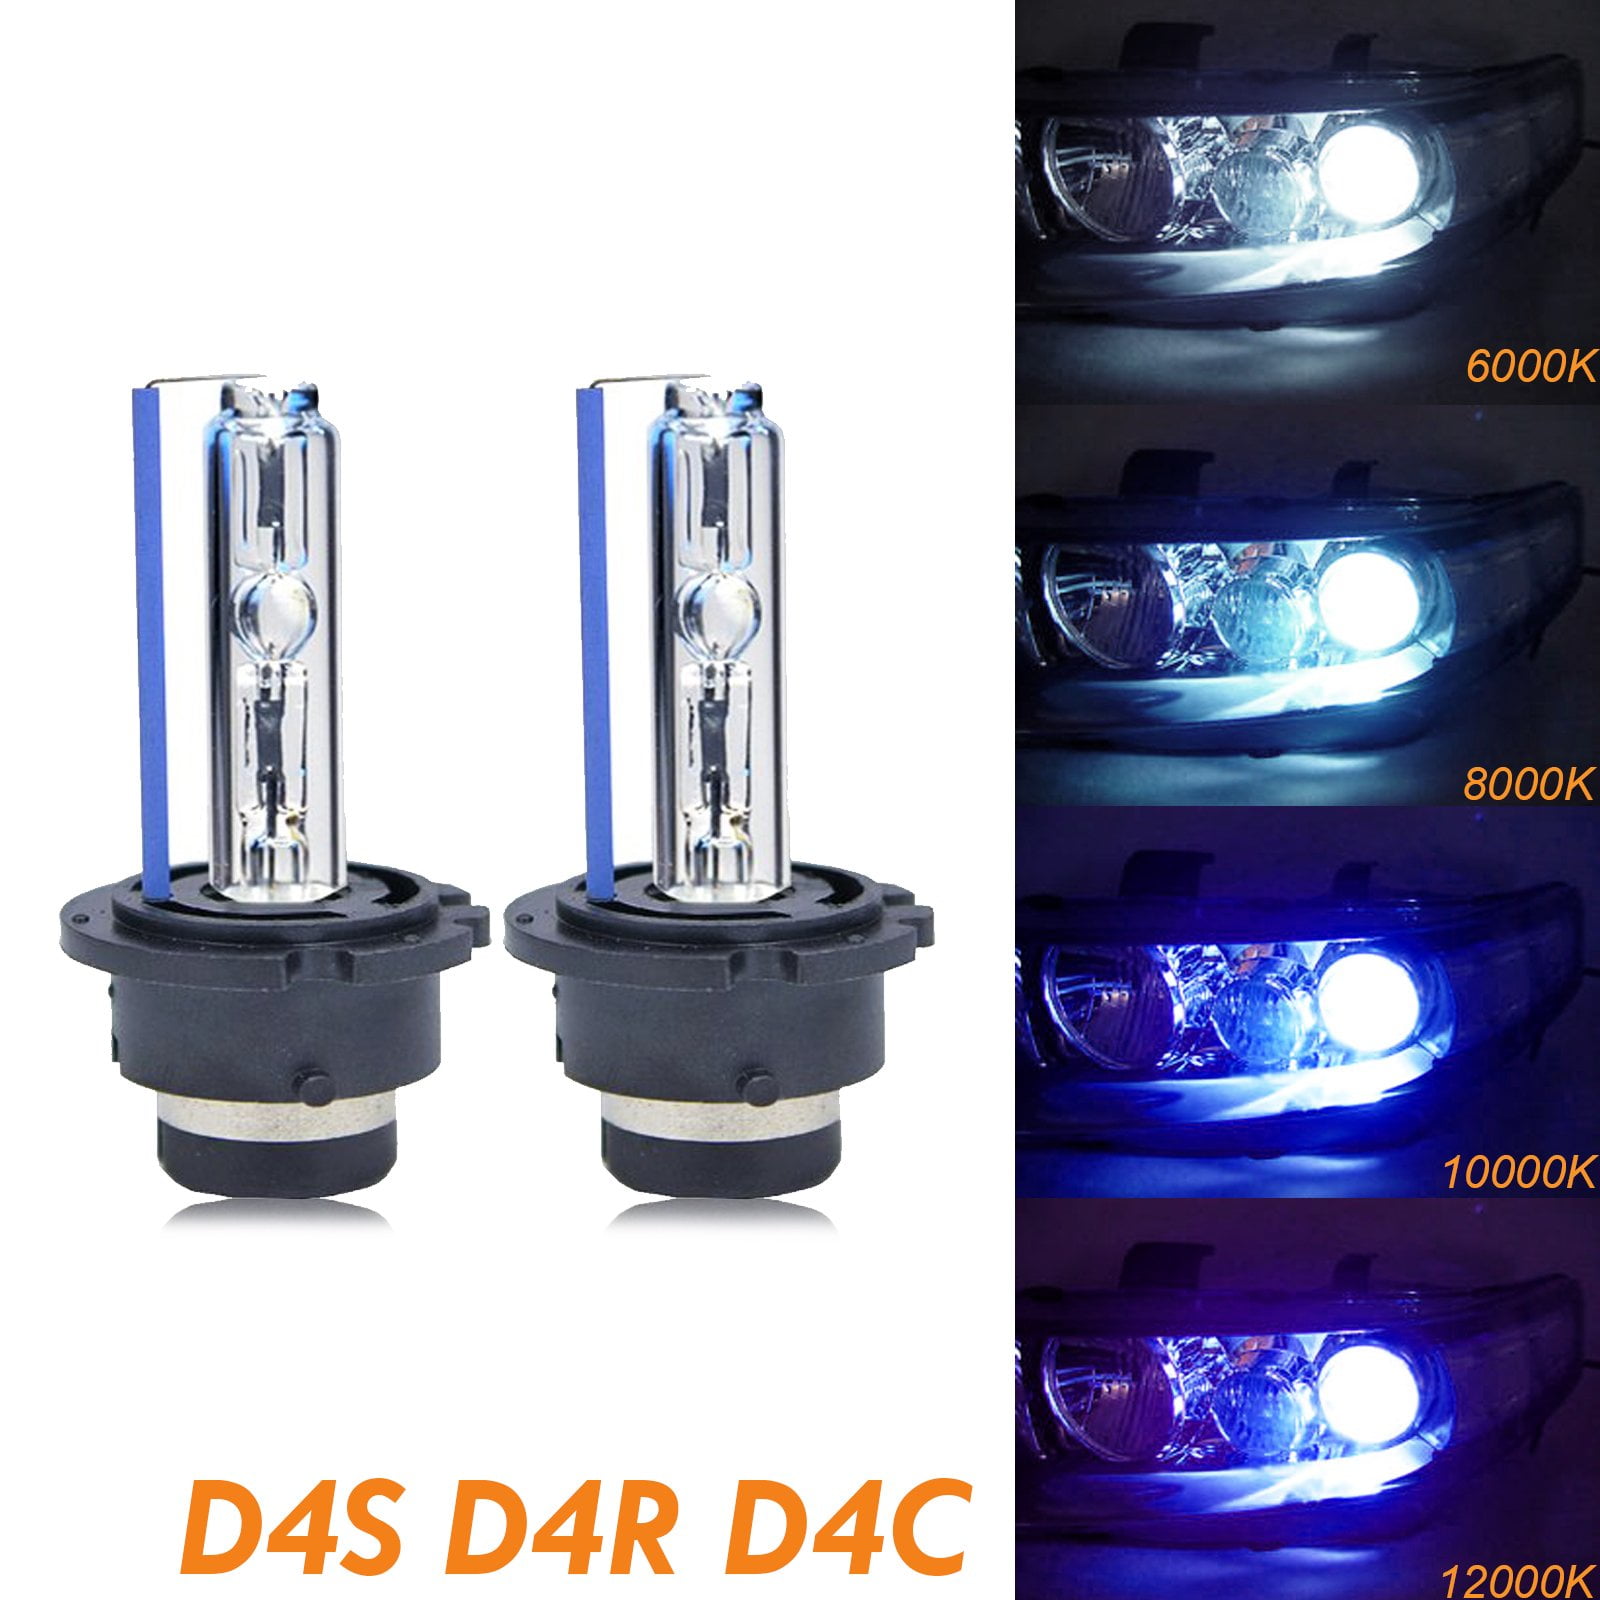 2 x D4S Genuine LUNEX CAR XENON BULBS REPLACEMENT FOR PHILIPS GE OSRAM 4300K 